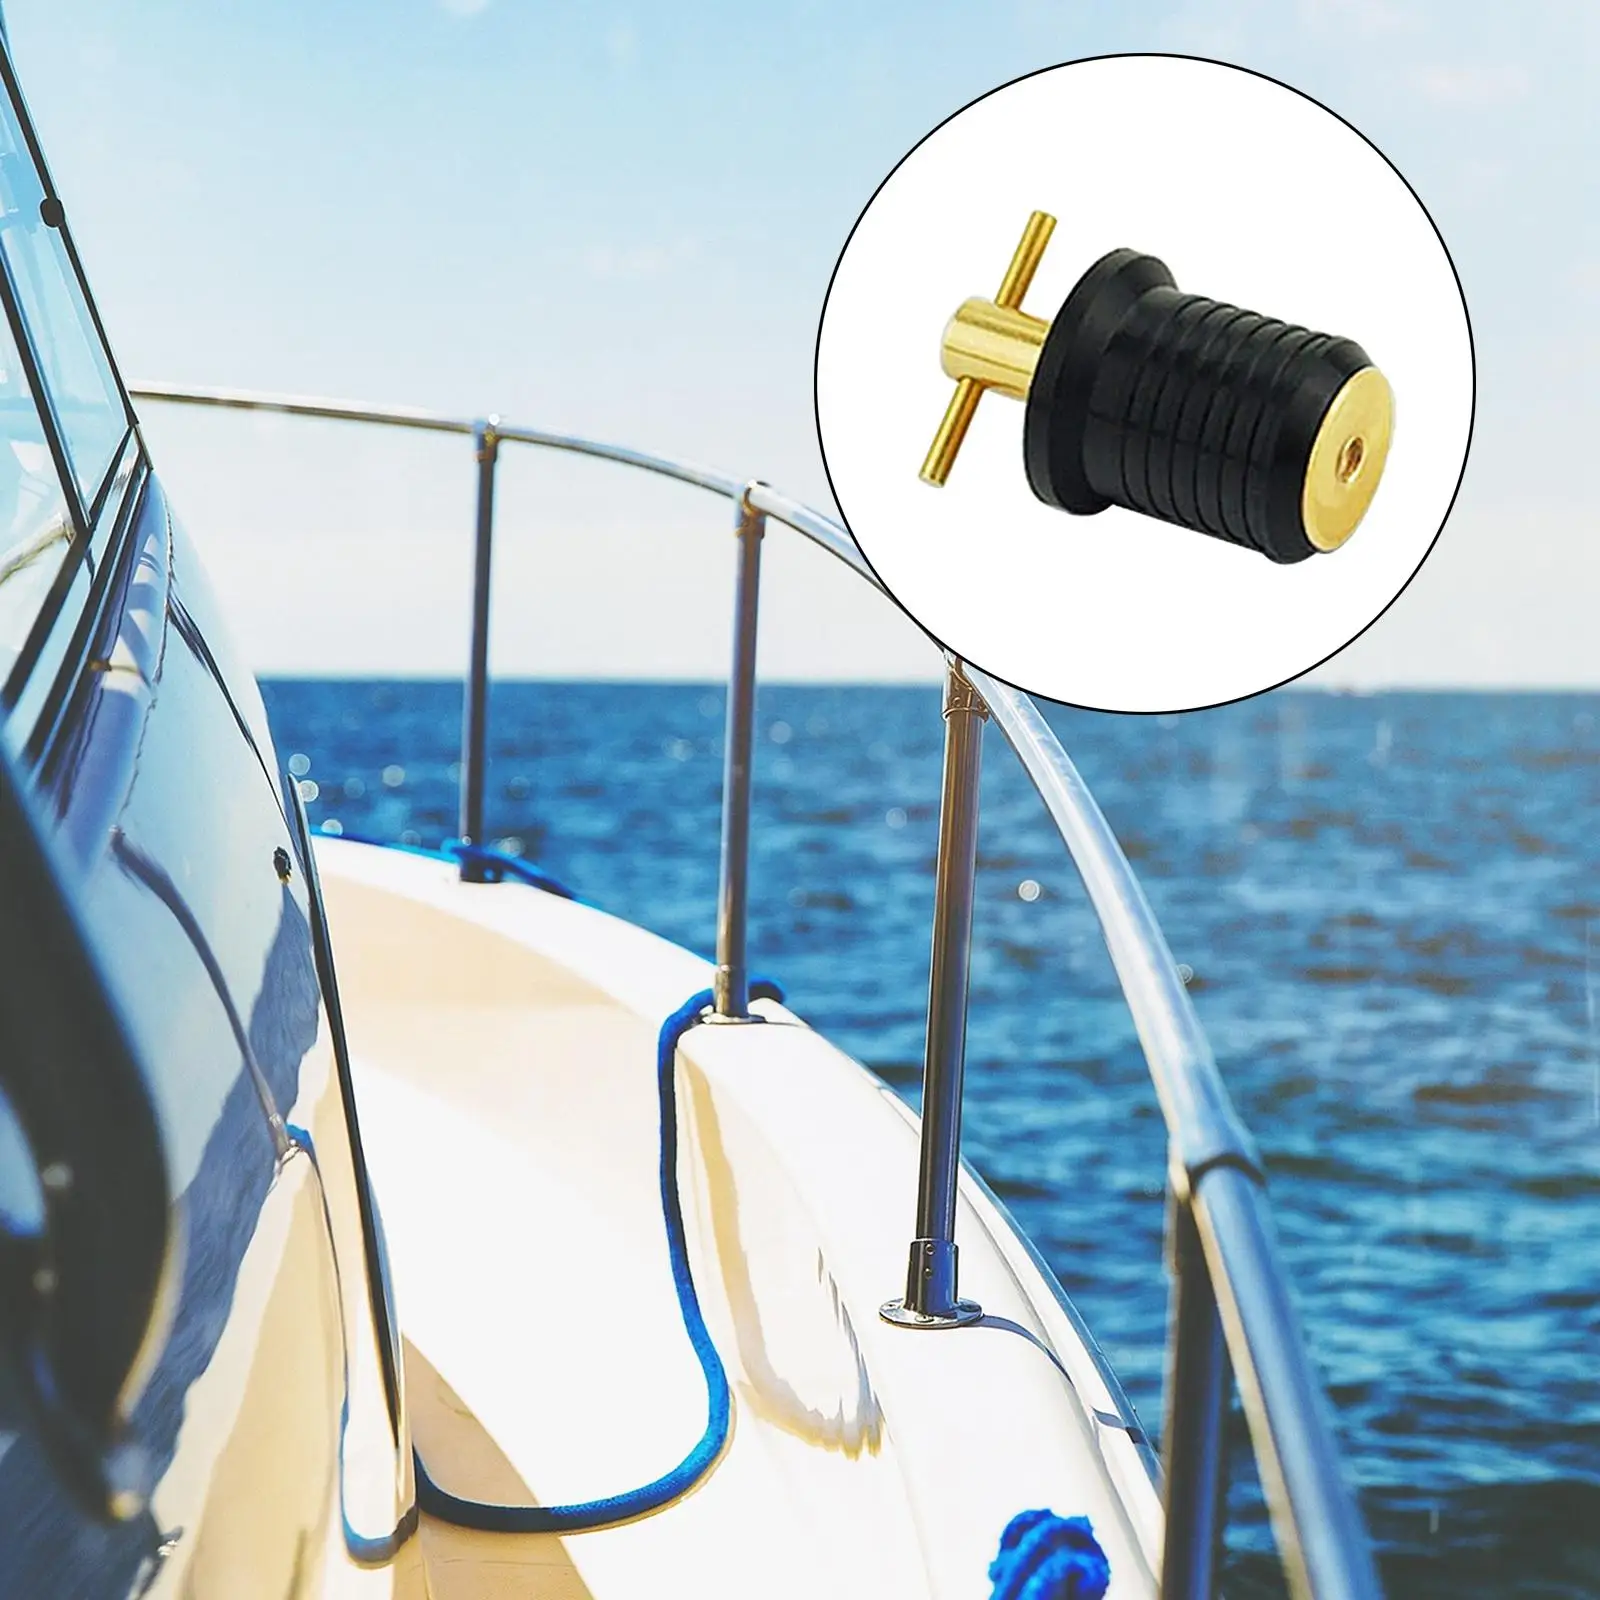 Boat Drain Plug Direct Replaces High Performance Rubber Plug Easy to Operate  Spare Parts Premium , Strong and Sturdy